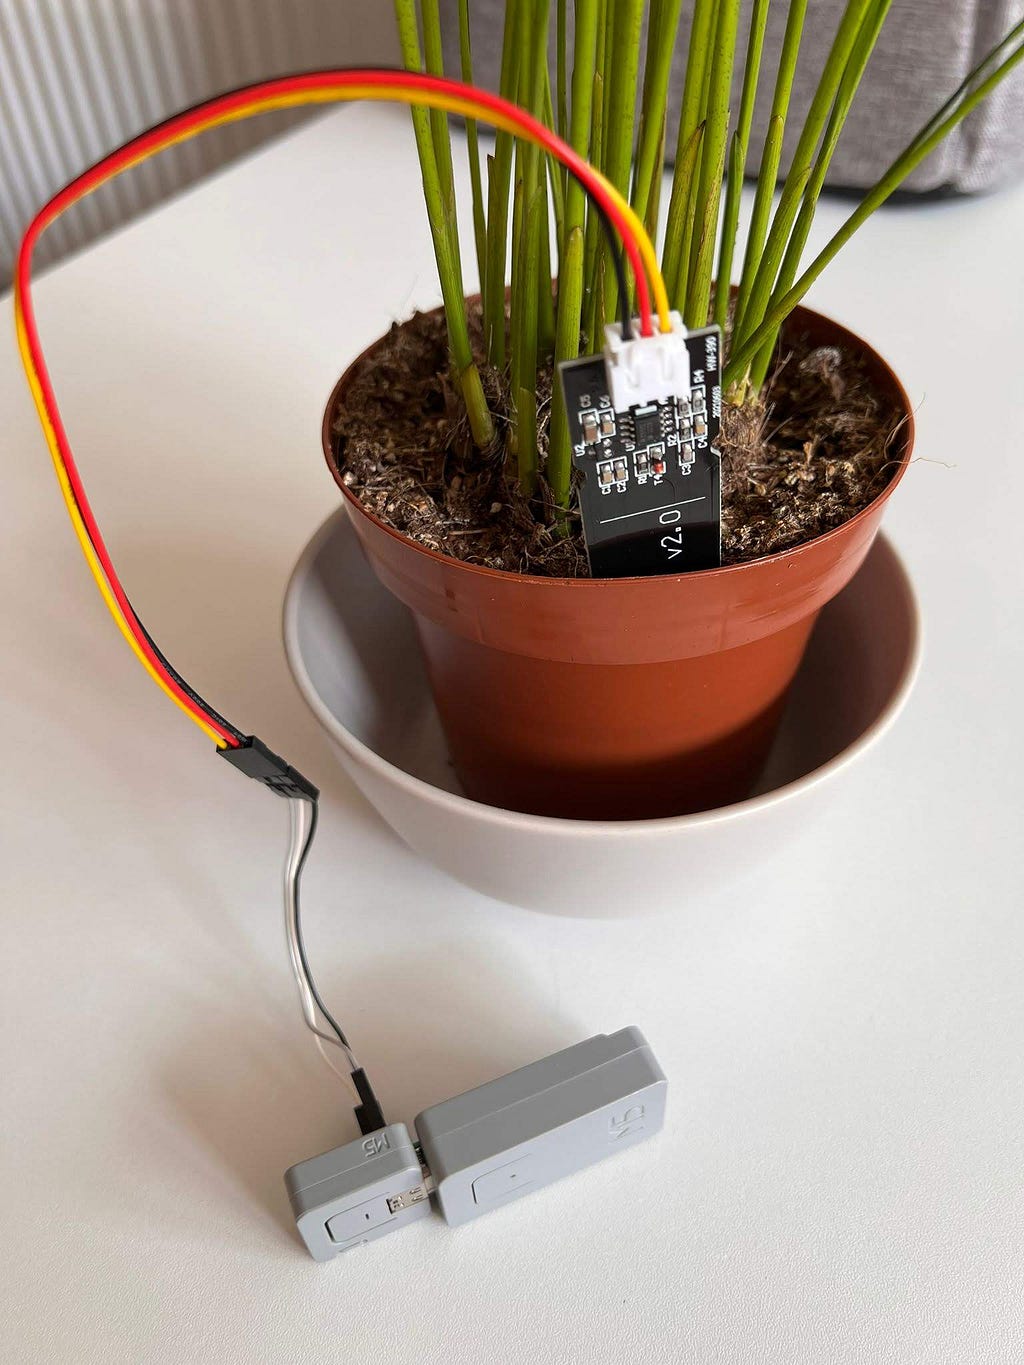 A photo of the finished project, showing the sensor inside an araca palm plant, with the M5Atom TailBat used for power